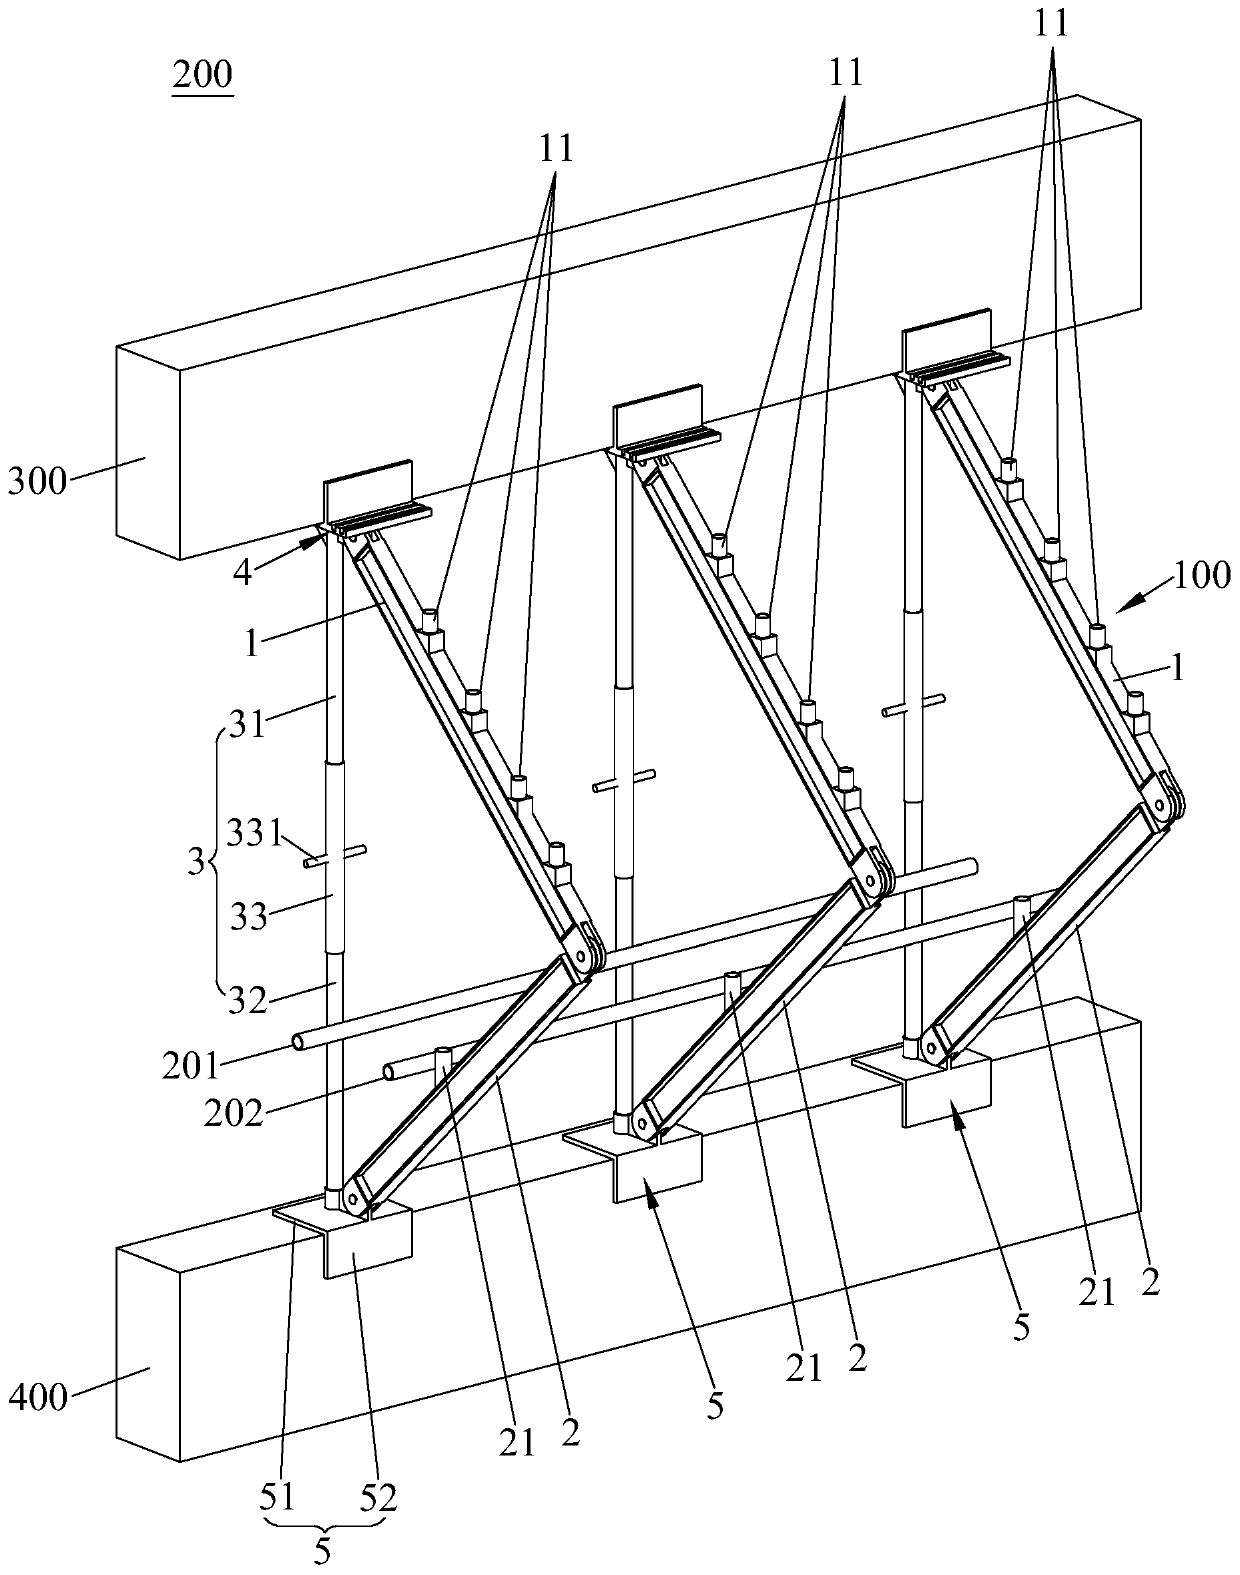 Scaffold supporting structure and system